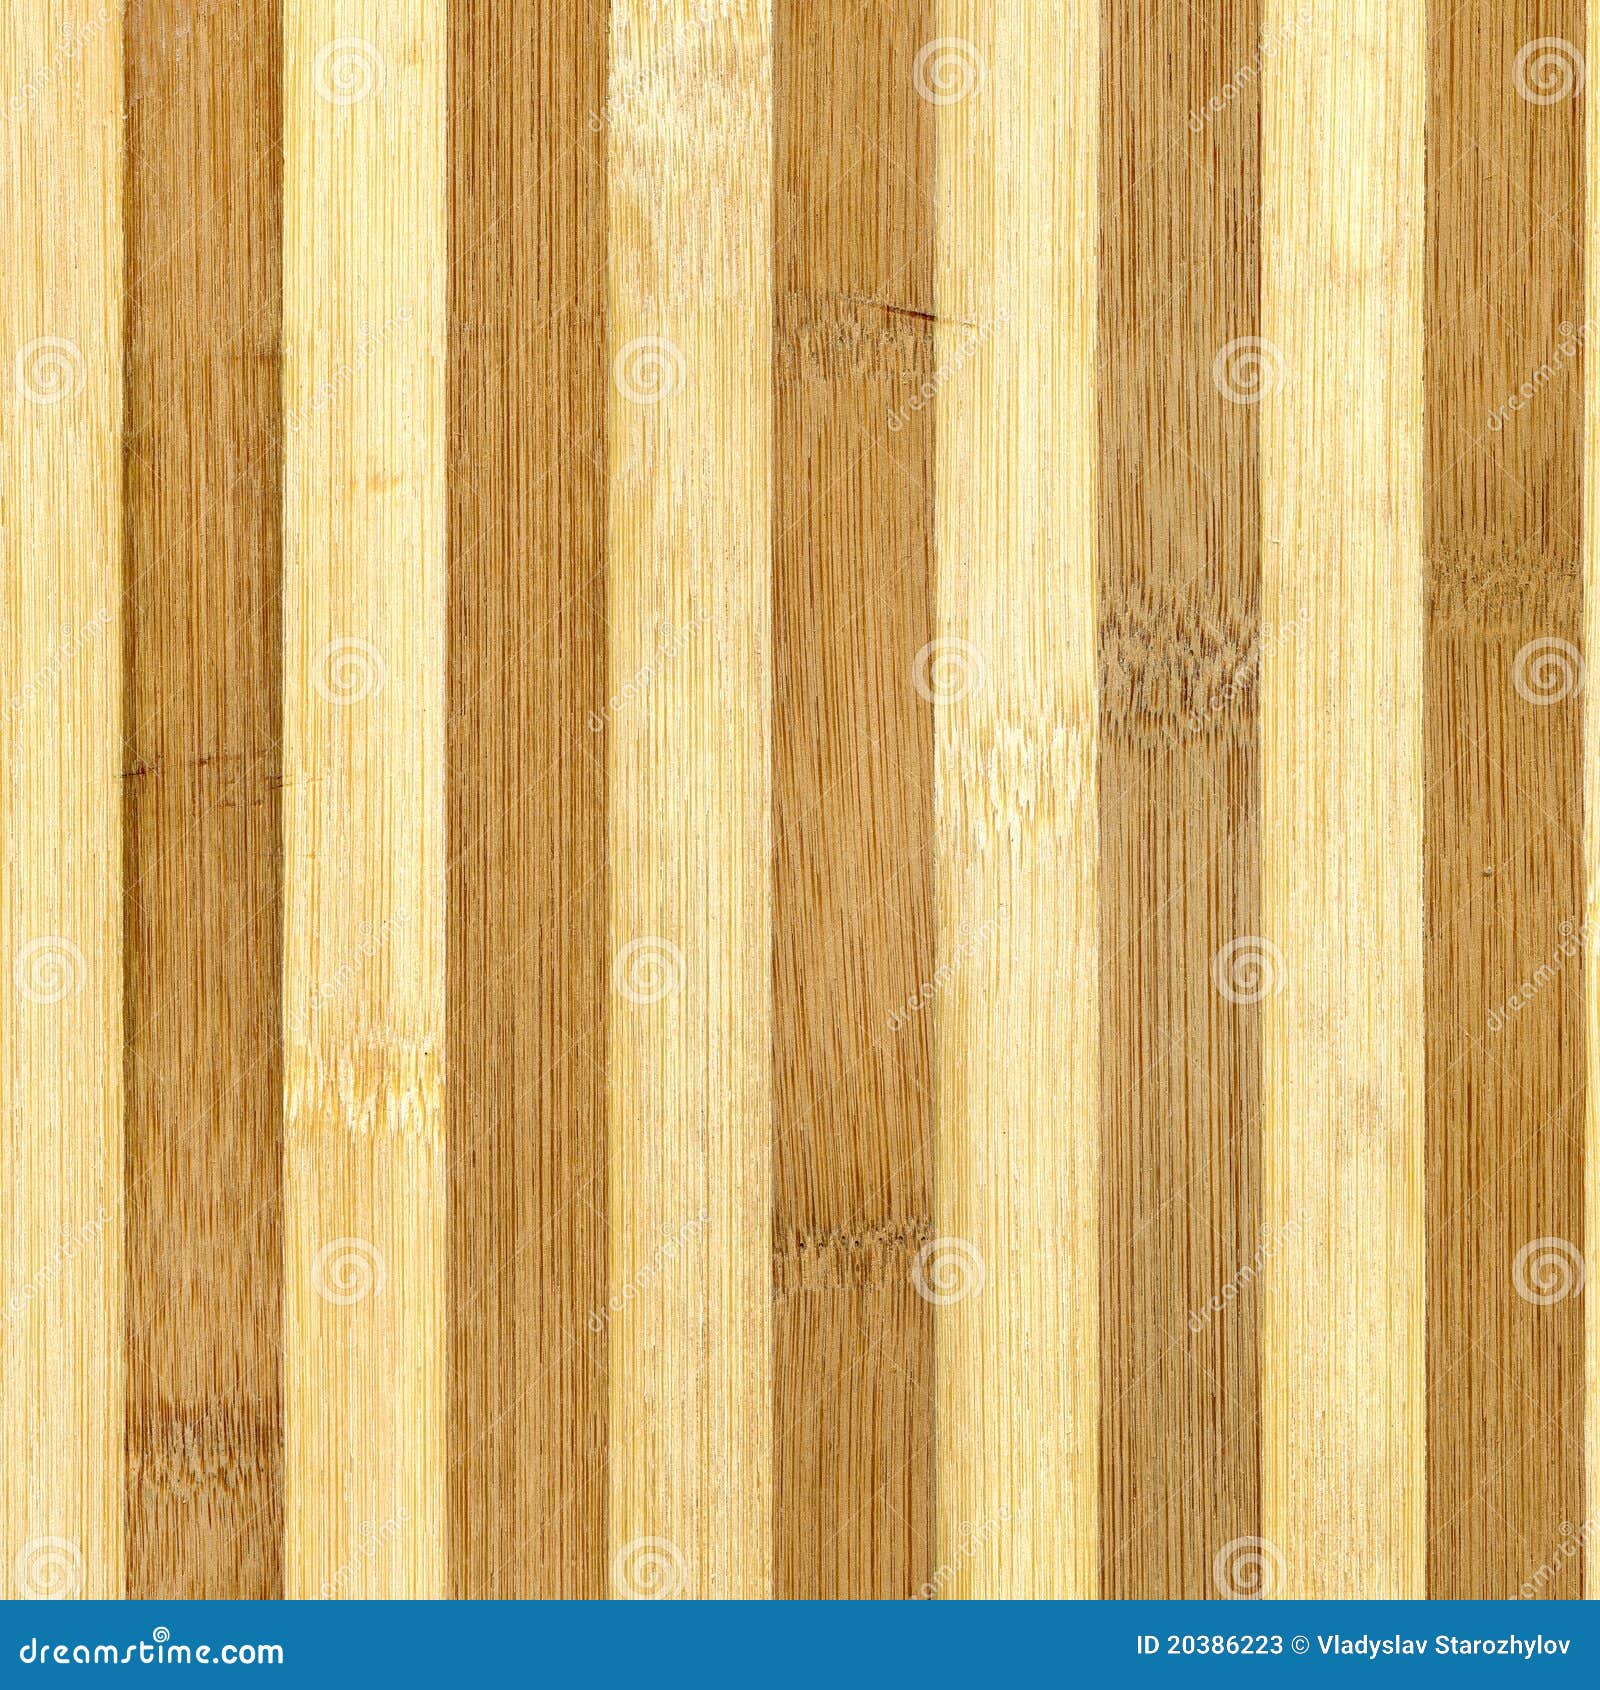 Close up of wooden texture striped bamboo.